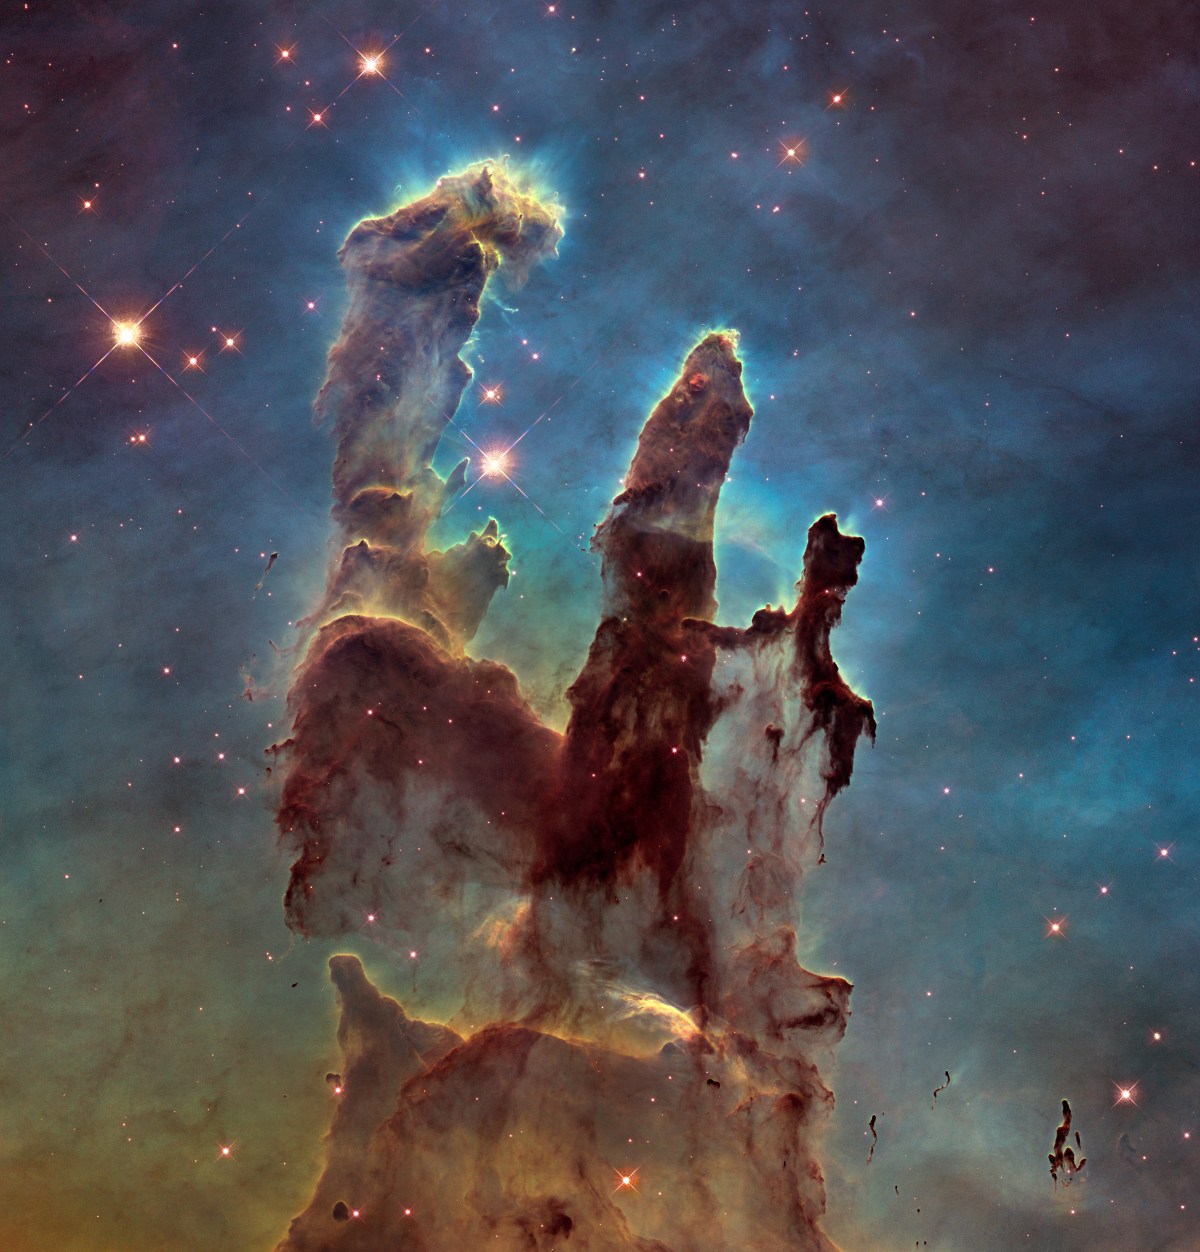 The NASA/ESA Hubble Space Telescope has revisited one of its most iconic and popular images: the Eagle Nebula’s Pillars of Creation. This image shows the pillars as seen in visible light, capturing the multi-coloured glow of gas clouds, wispy tendrils of dark cosmic dust, and the rust-coloured elephants’ trunks of the nebula’s famous pillars. The dust and gas in the pillars is seared by the intense radiation from young stars and eroded by strong winds from massive nearby stars. With these new images comes better contrast and a clearer view for astronomers to study how the structure of the pillars is changing over time.